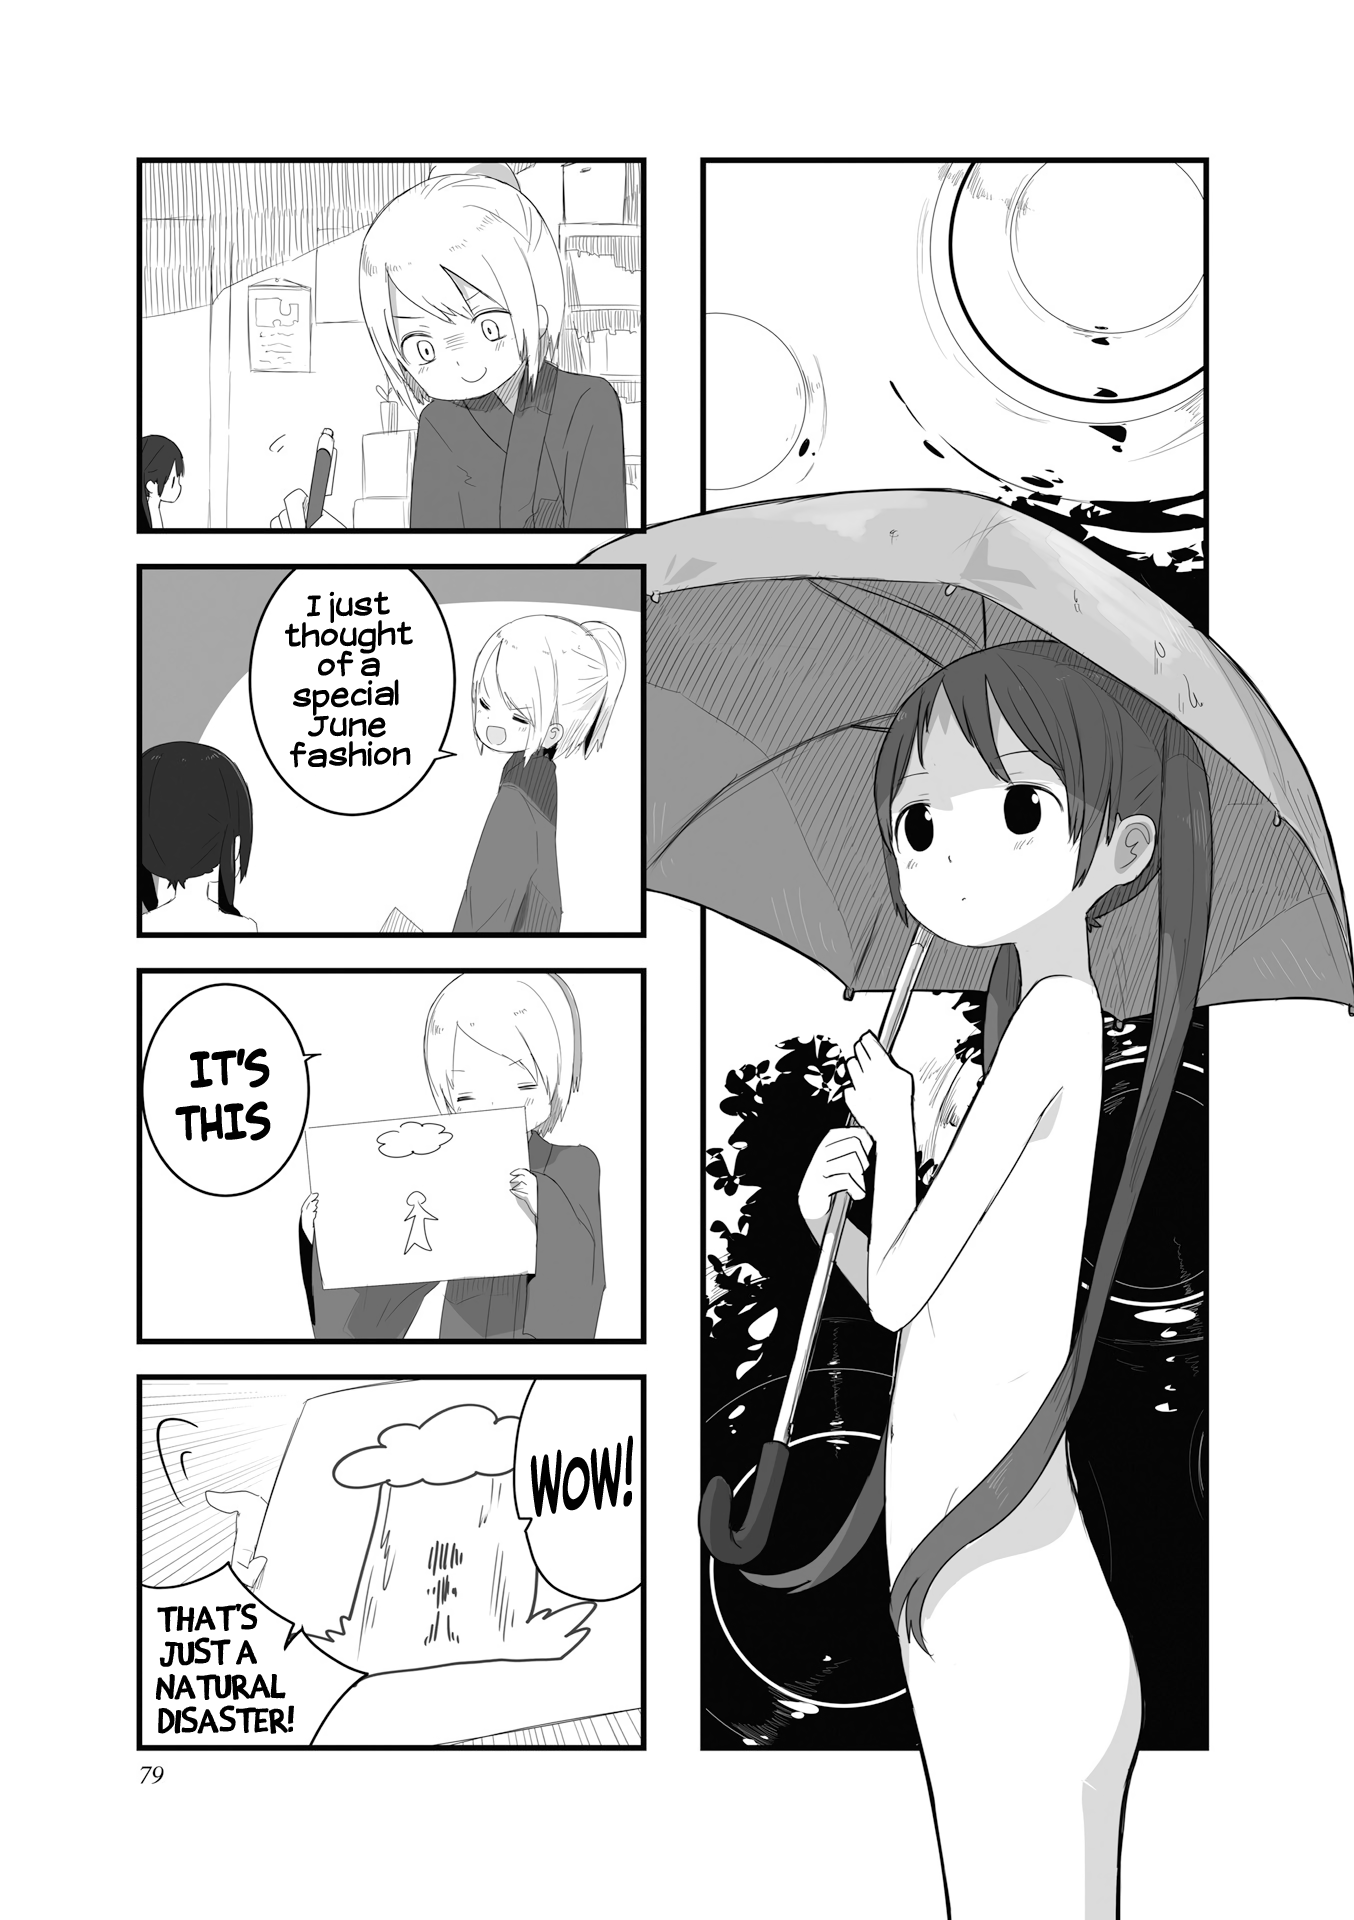 Zenra.zip Vol.1 Chapter 10: The Current Rainy Season Trend. - Picture 1